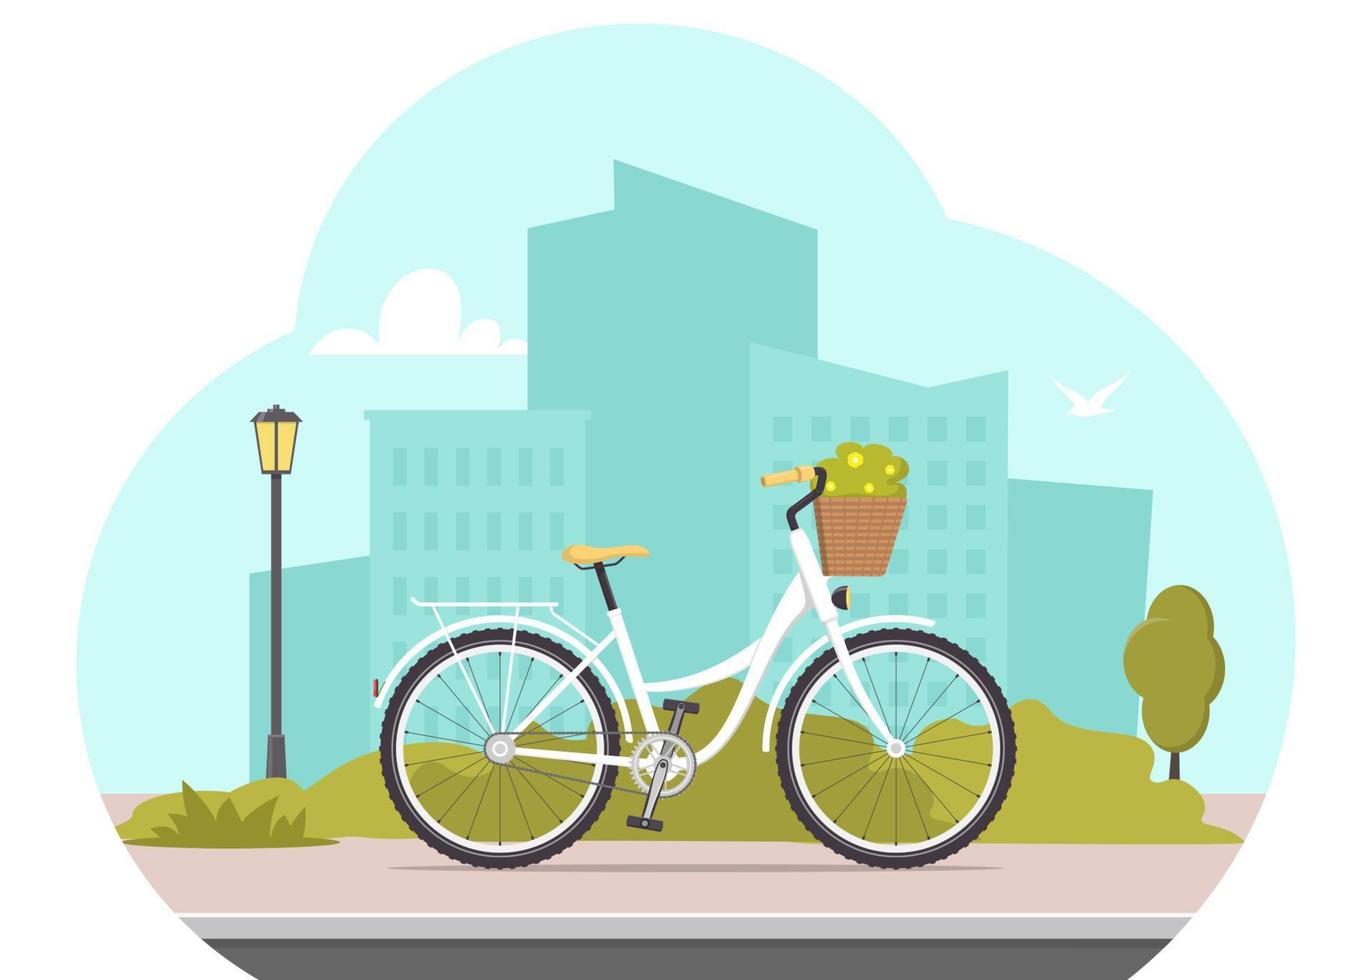 Cute bicycle on city silhouette background. Bike concept illustration for app or website. Modern transport. Flat style vector illustration.